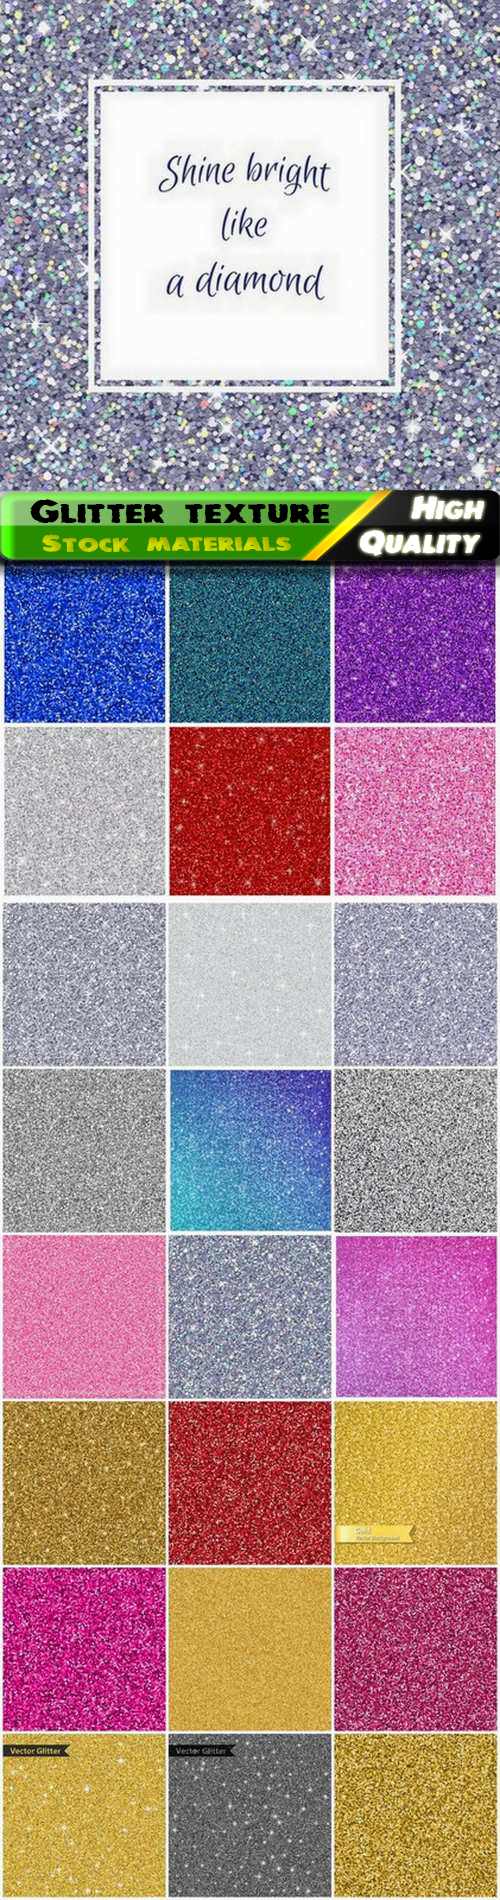 Holiday glitter texture with shine sparks - 25 Eps